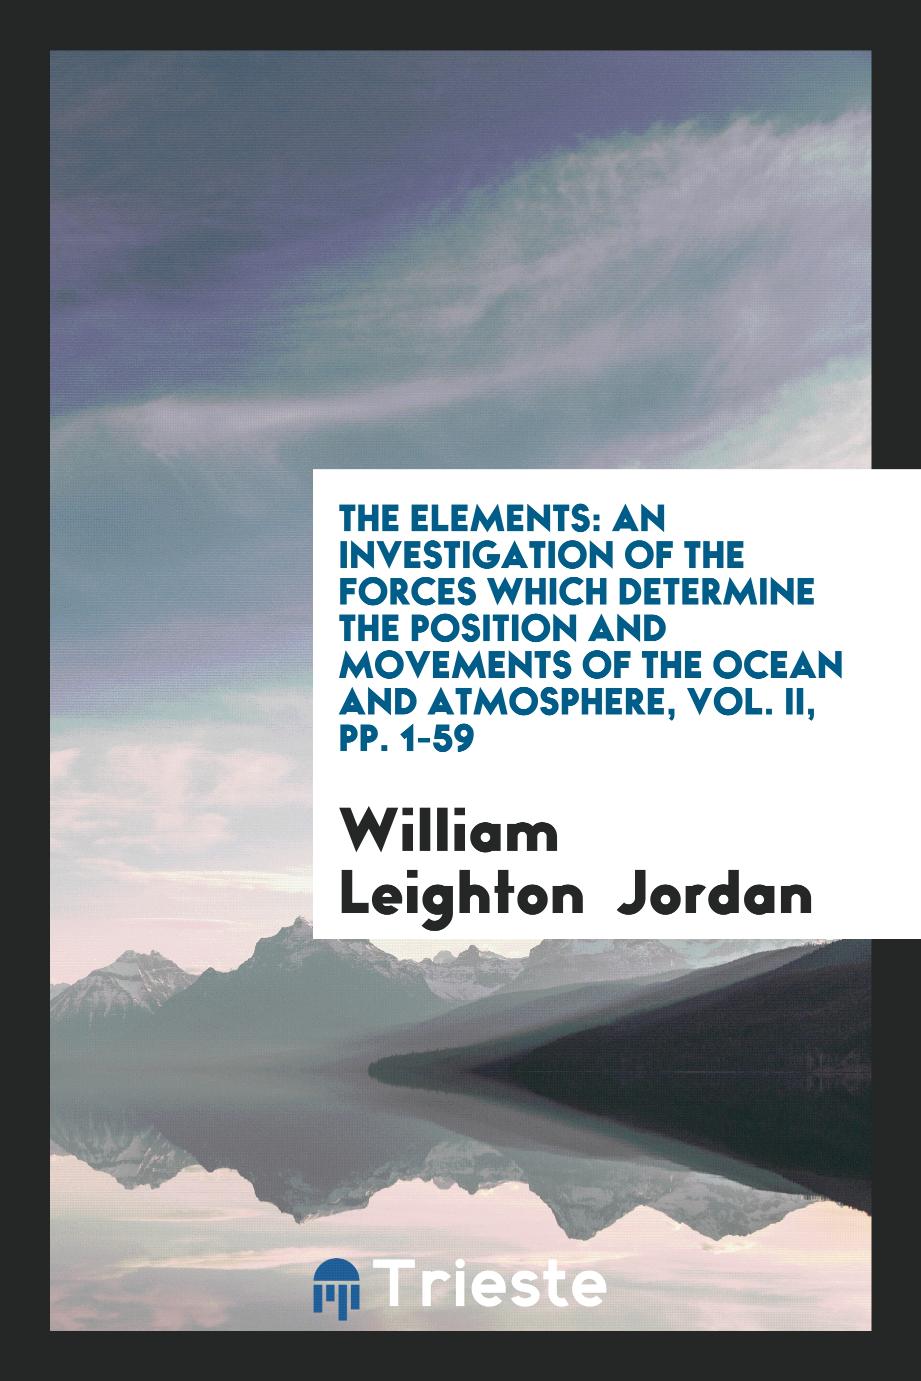 The Elements: An Investigation of the Forces which Determine the Position and Movements of the ocean and atmosphere, Vol. II, pp. 1-59